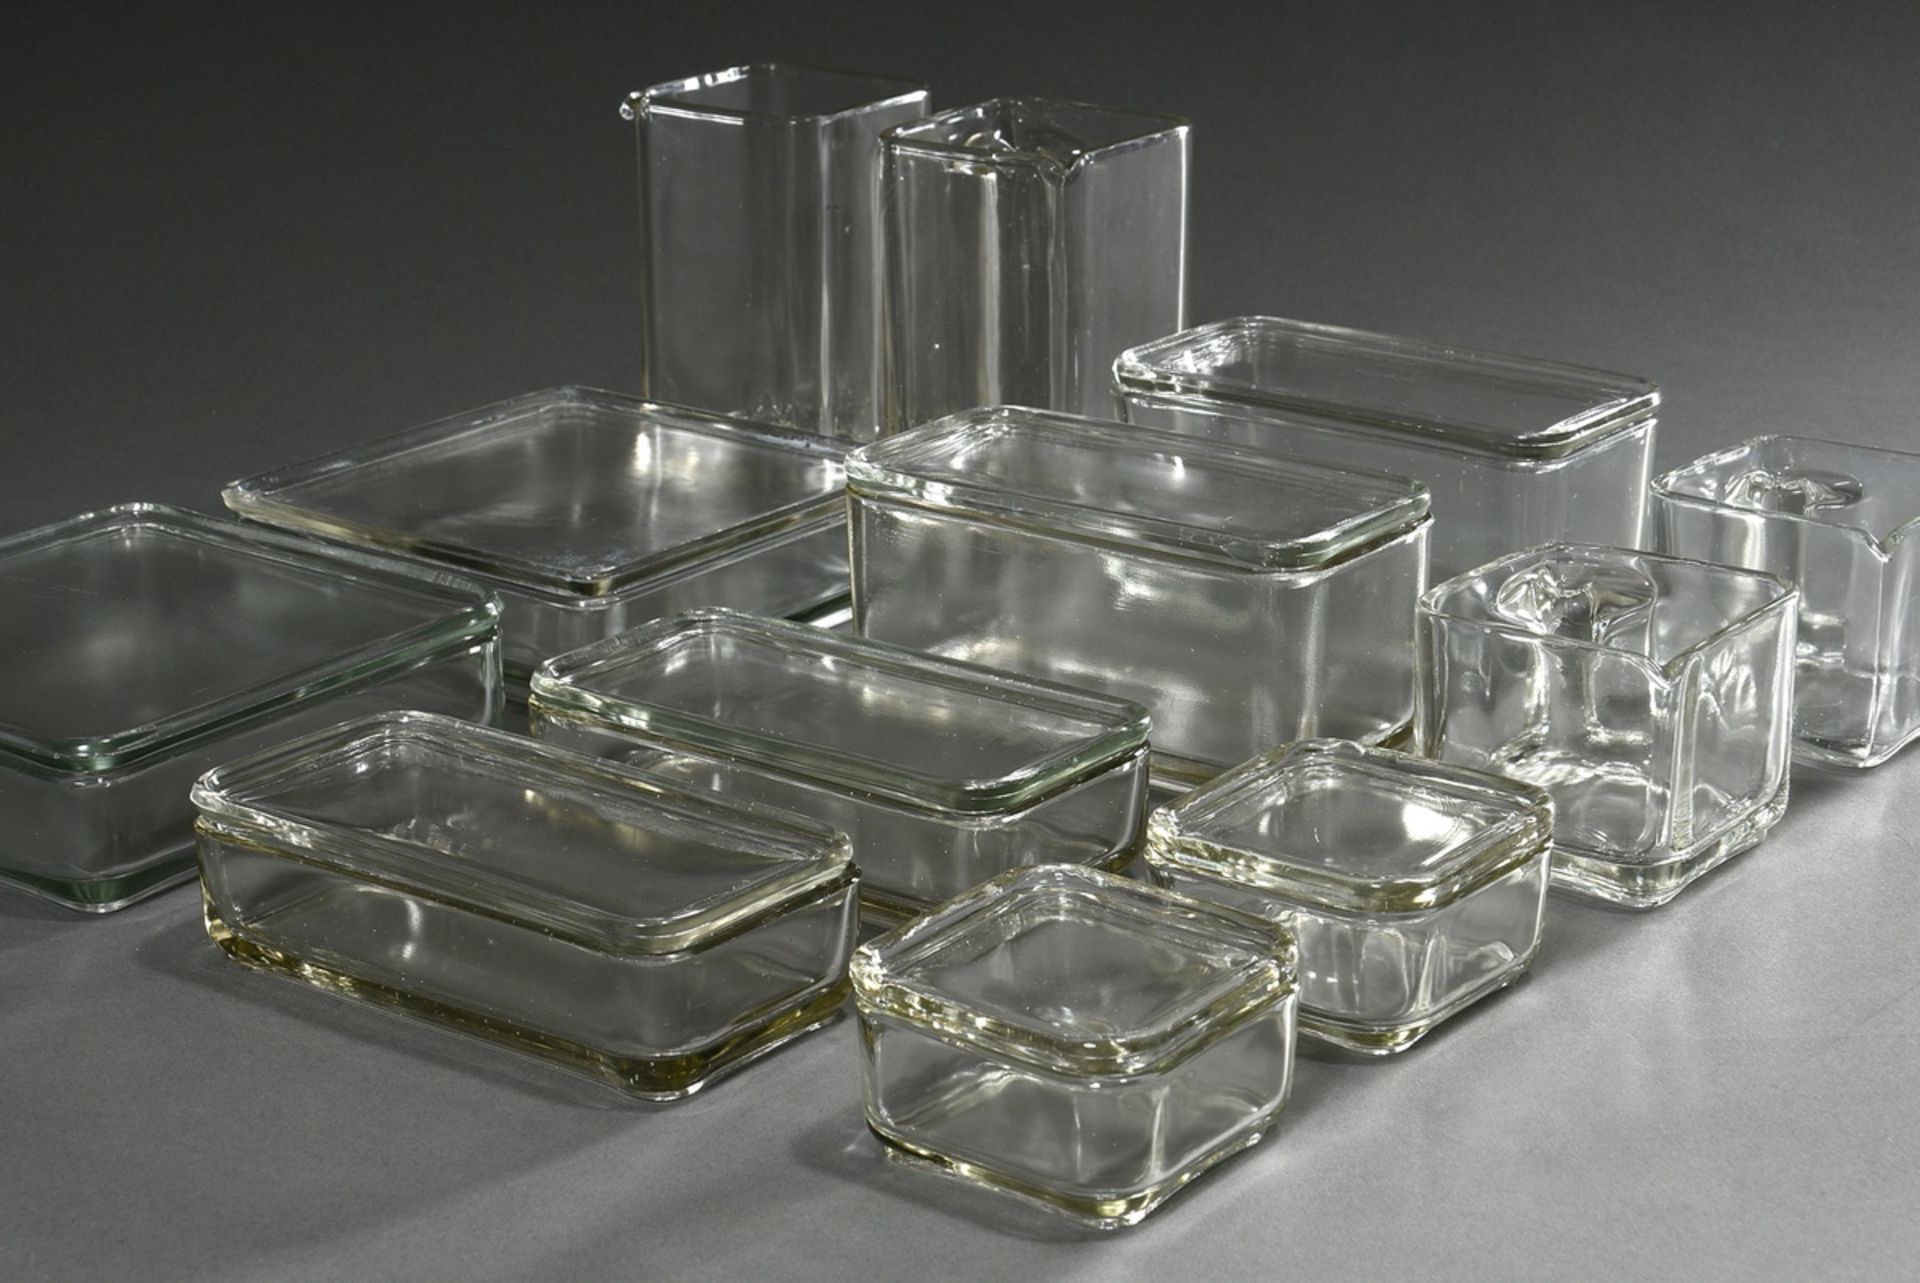 12 Stackable storage jars from the "Kubus-Geschirr", 7 with lid, colourless pressed glass, design: - Image 2 of 6